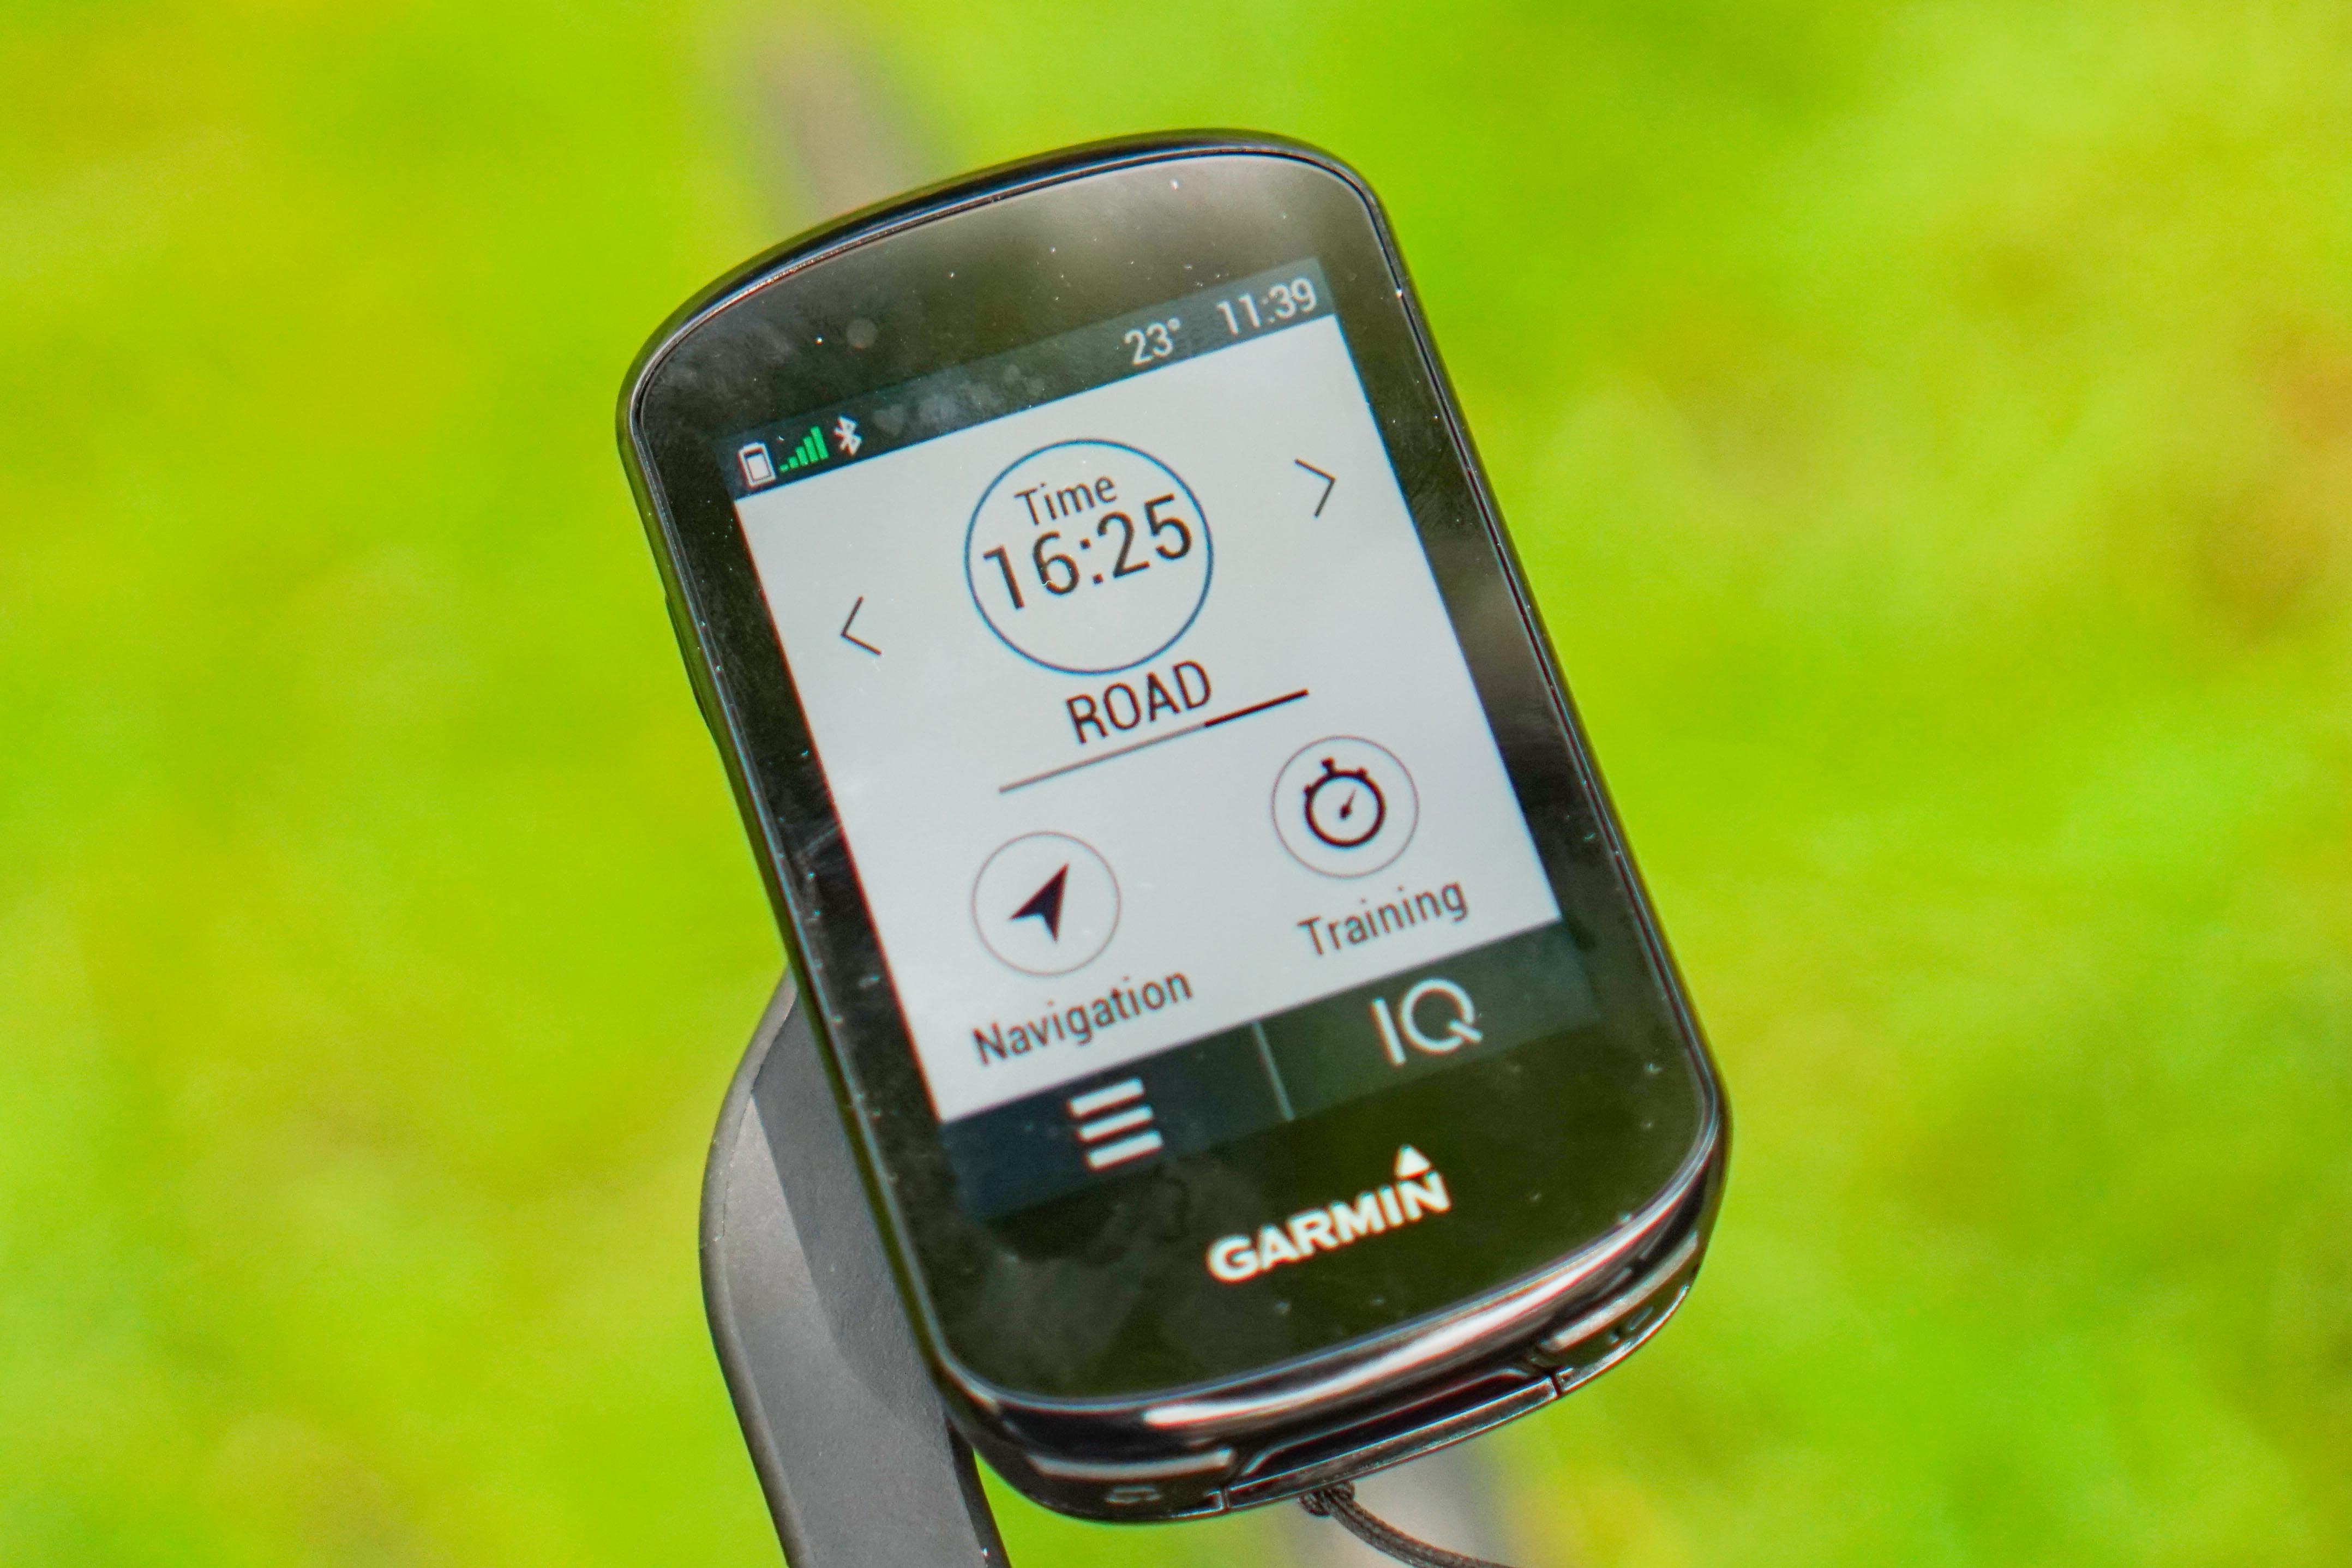 The new Garmin Edge 830: What makes the Garmin 830 different from